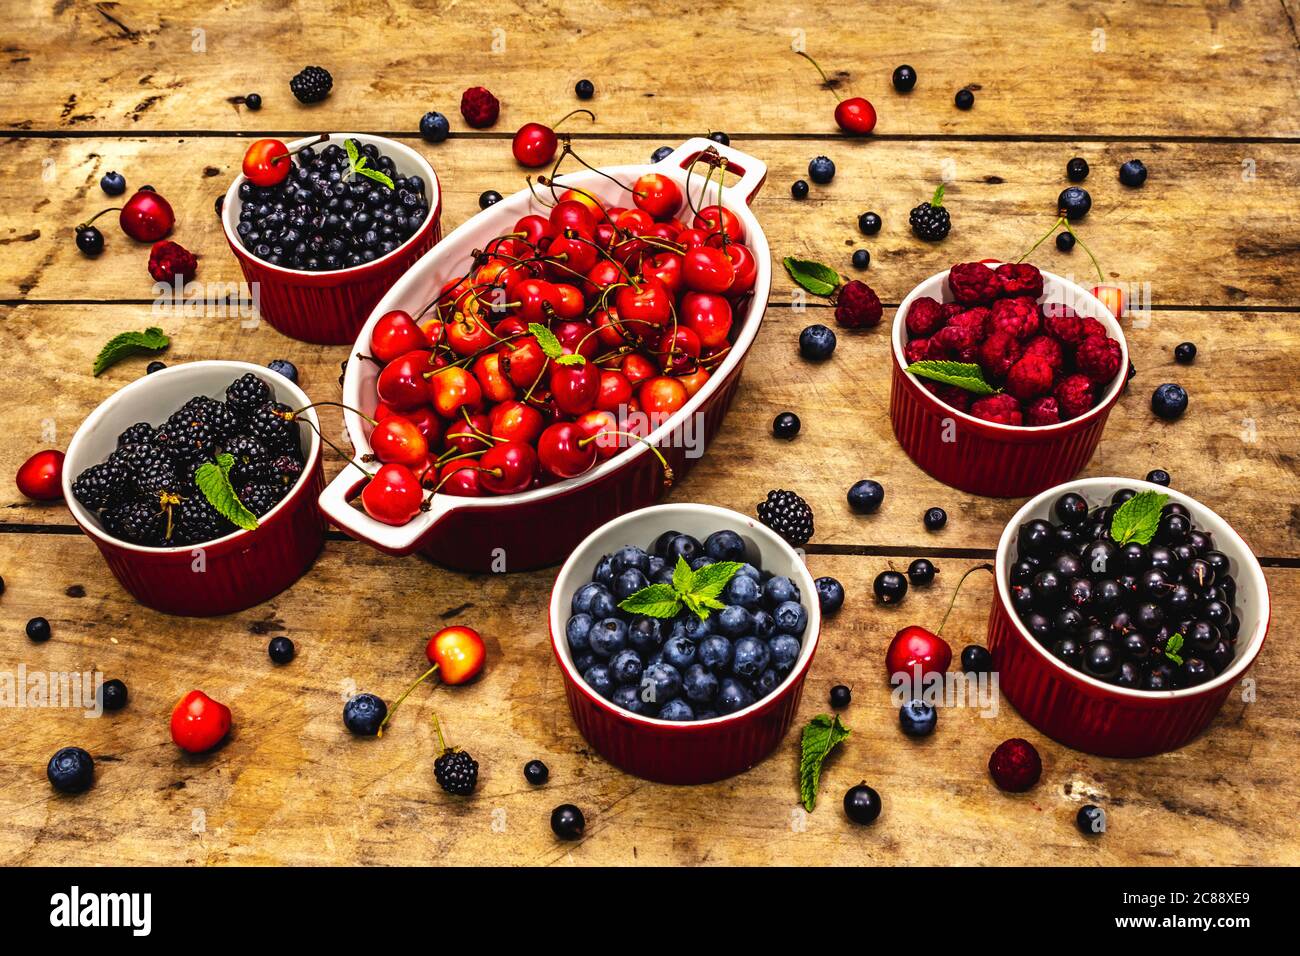 Assorted berries in bowls: bilberry, blueberry, currant, blackberry, cherry and raspberry. Old wooden table background, close up Stock Photo